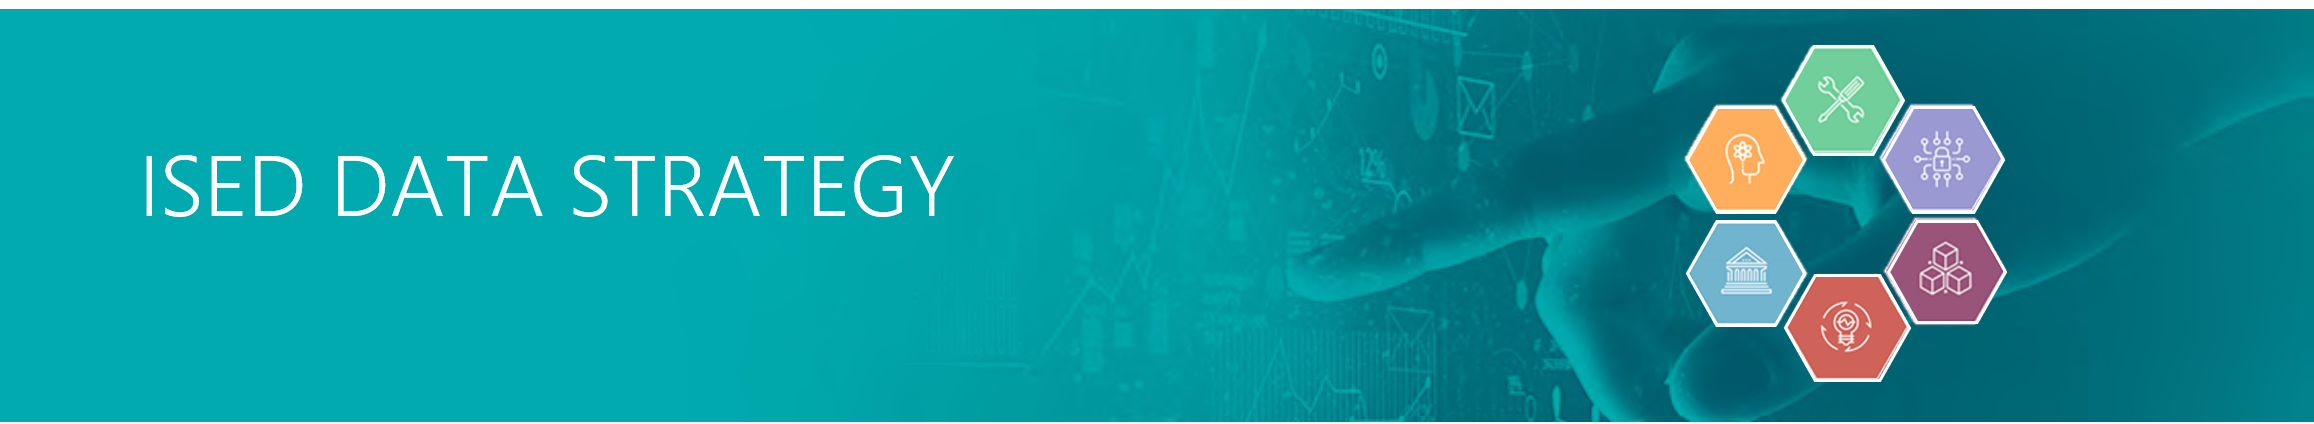 ISED Data Strategy Banner